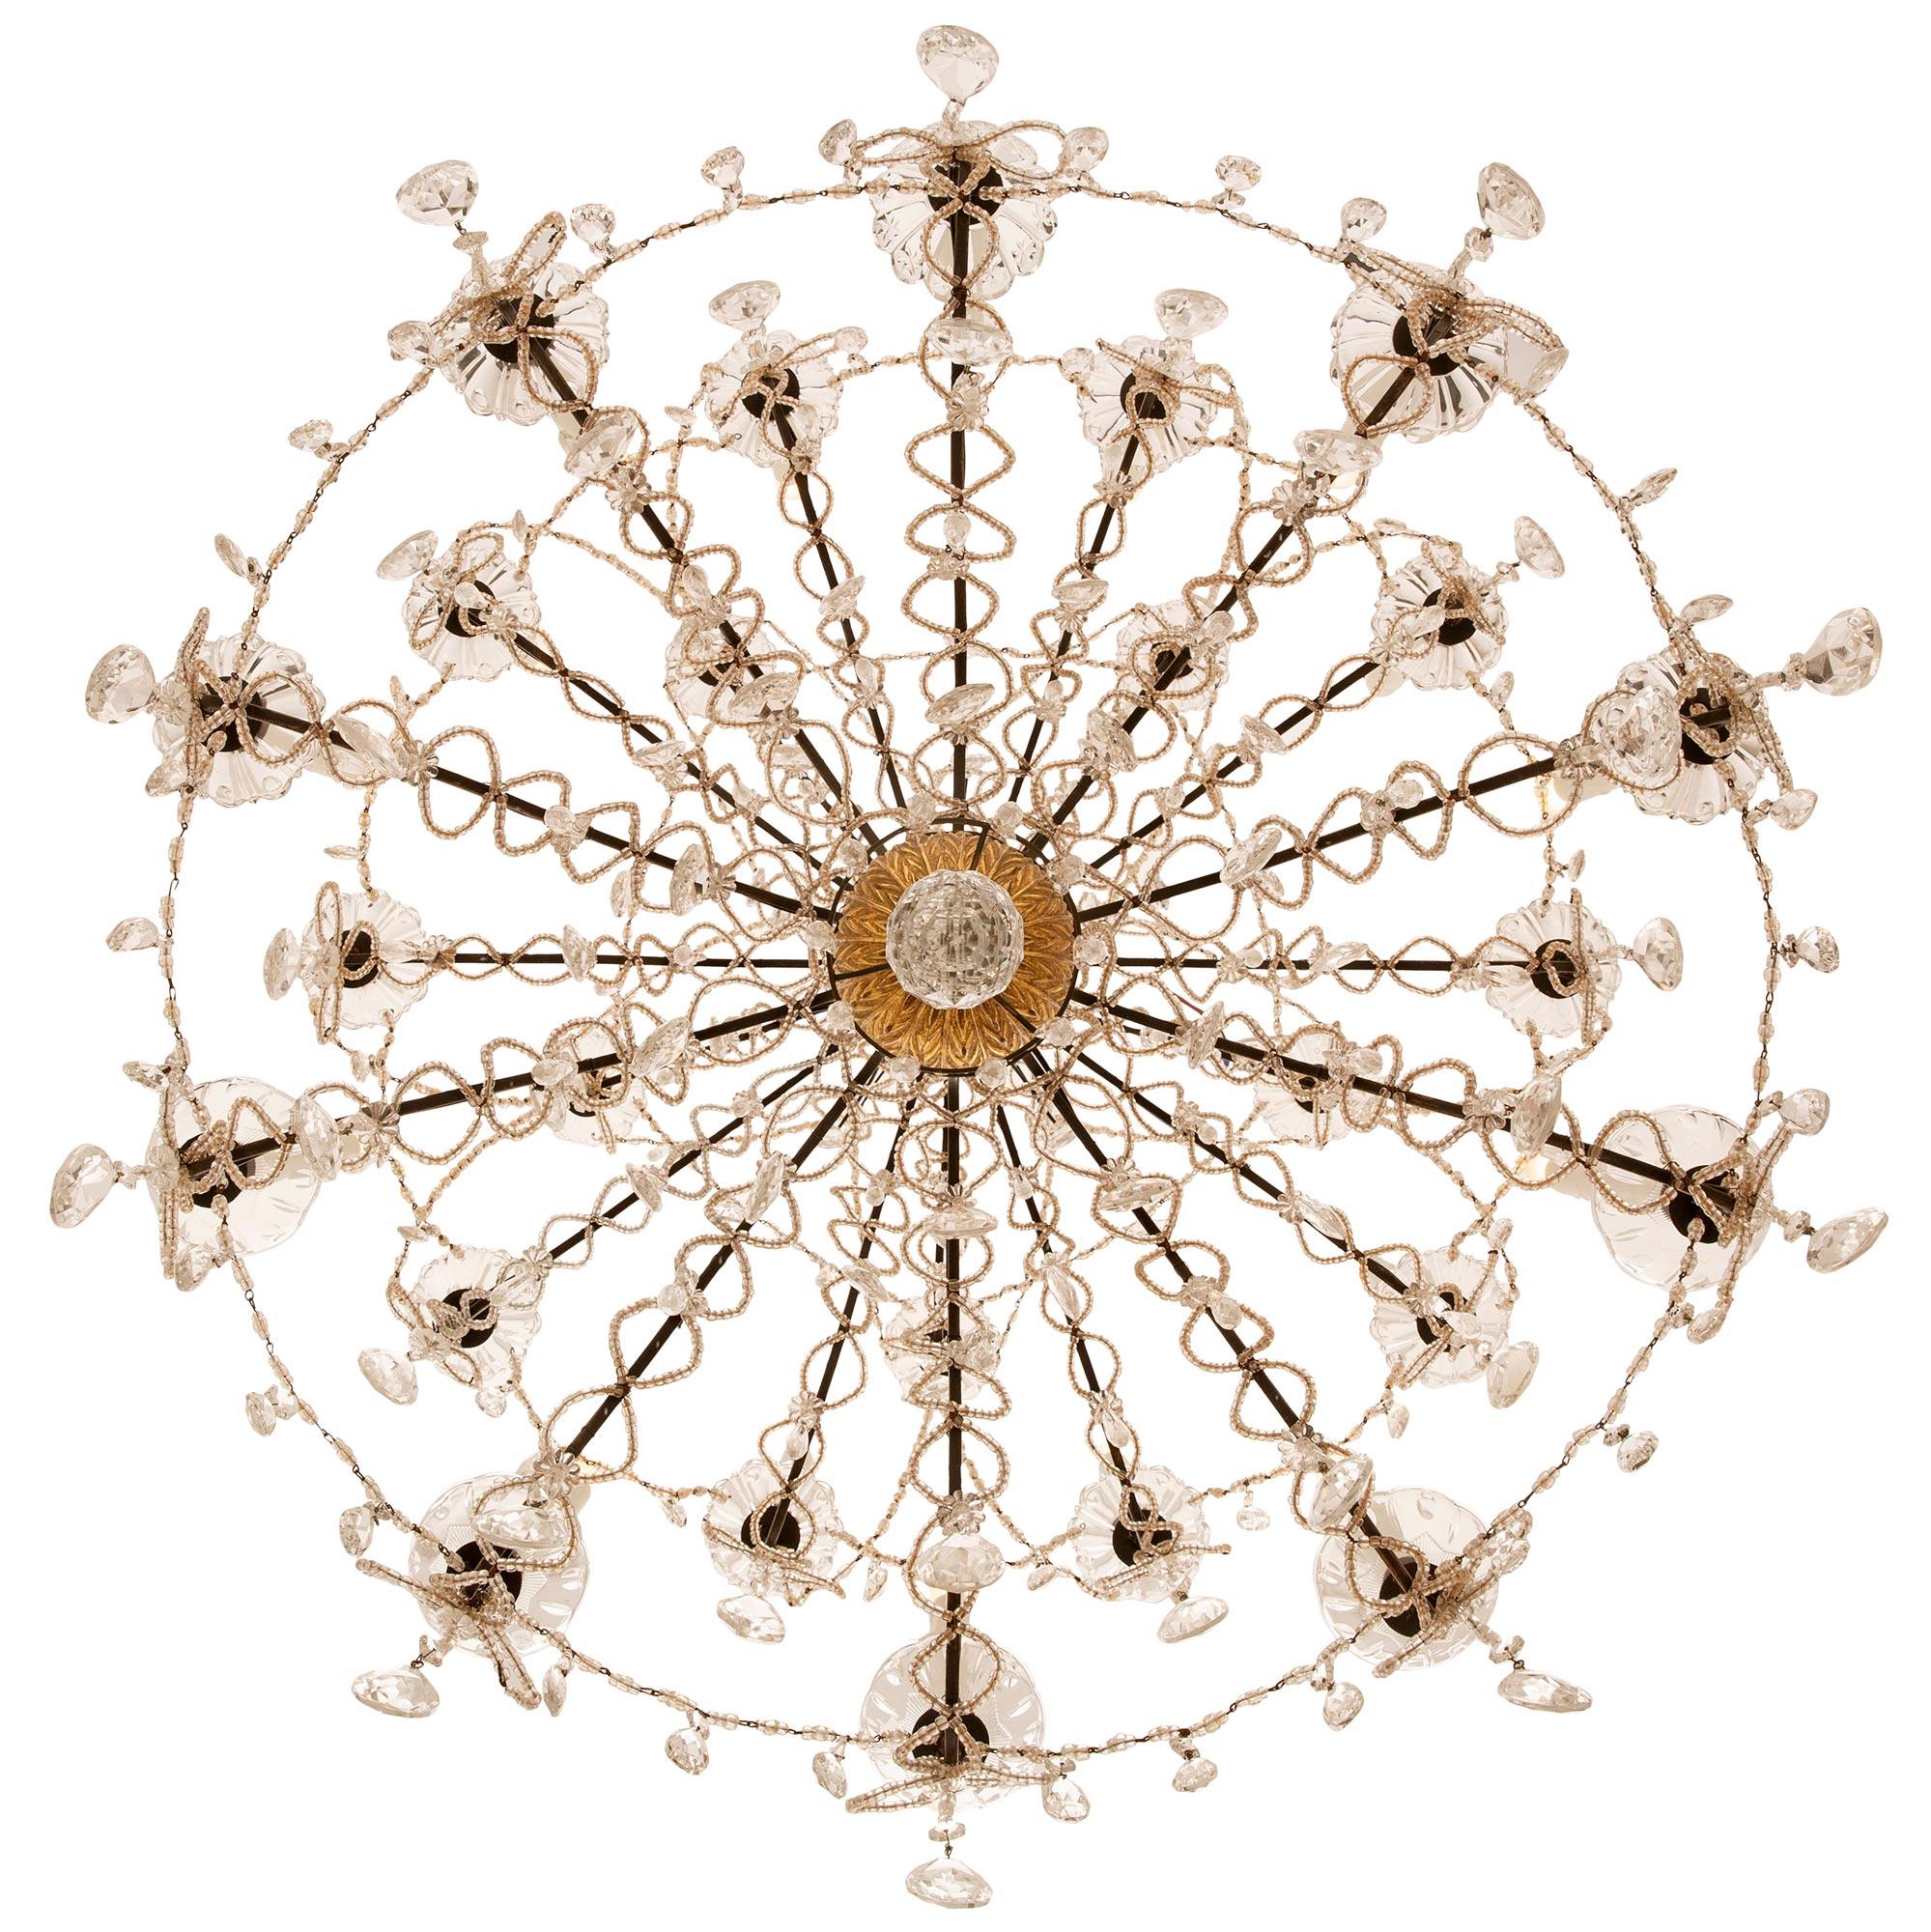 A most elegant and large scaled Italian early 19th century Giltwood, patinated wood, Iron and Crystal chandelier. The three tier twenty five arm chandelier is centered by a stunning faceted crystal ball surrounded by prism shaped cut crystal